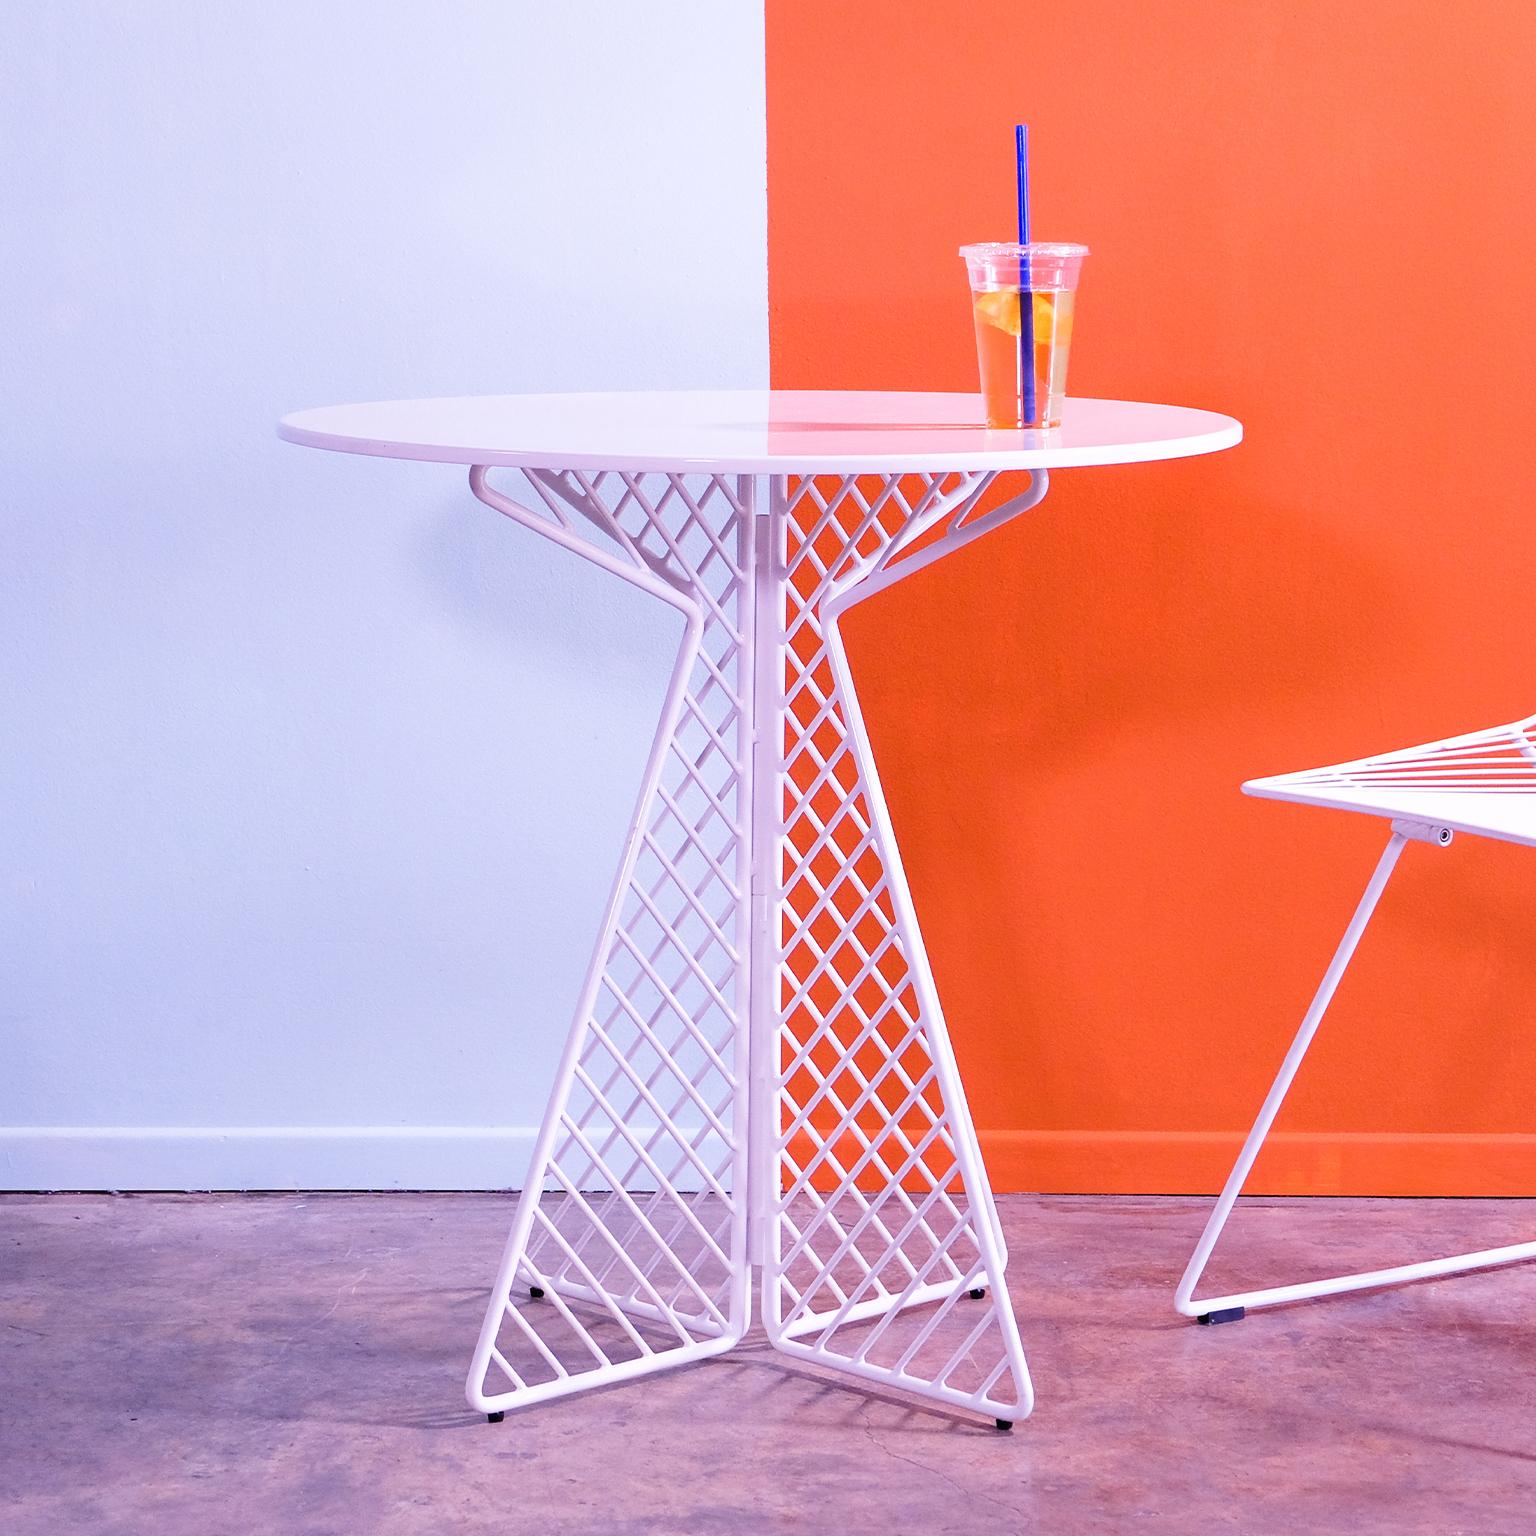 Modern Cafe Table, Metal Wire Flat Pack Dining Table by Bend Goods in Peacock Blue